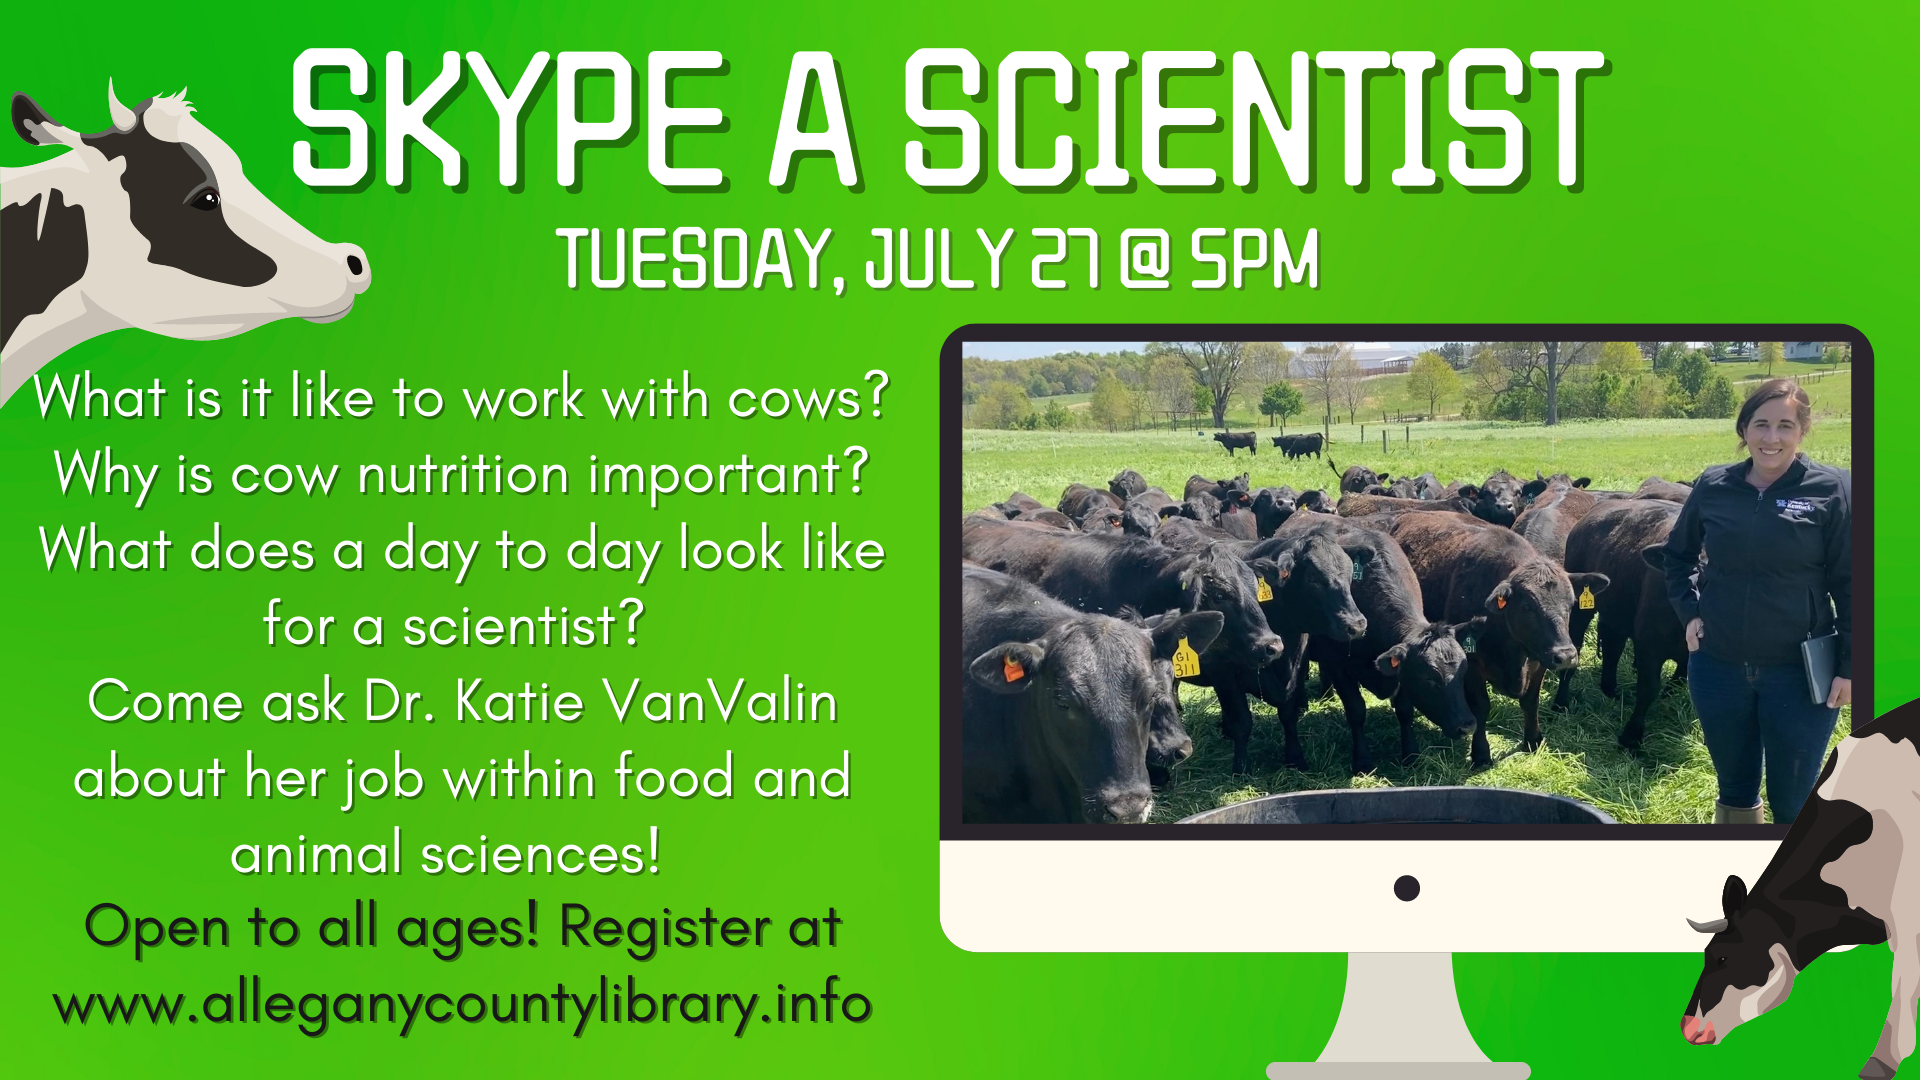 Green background with computer screen of Dr. Katie VanValin standing beside a group of black cows. 